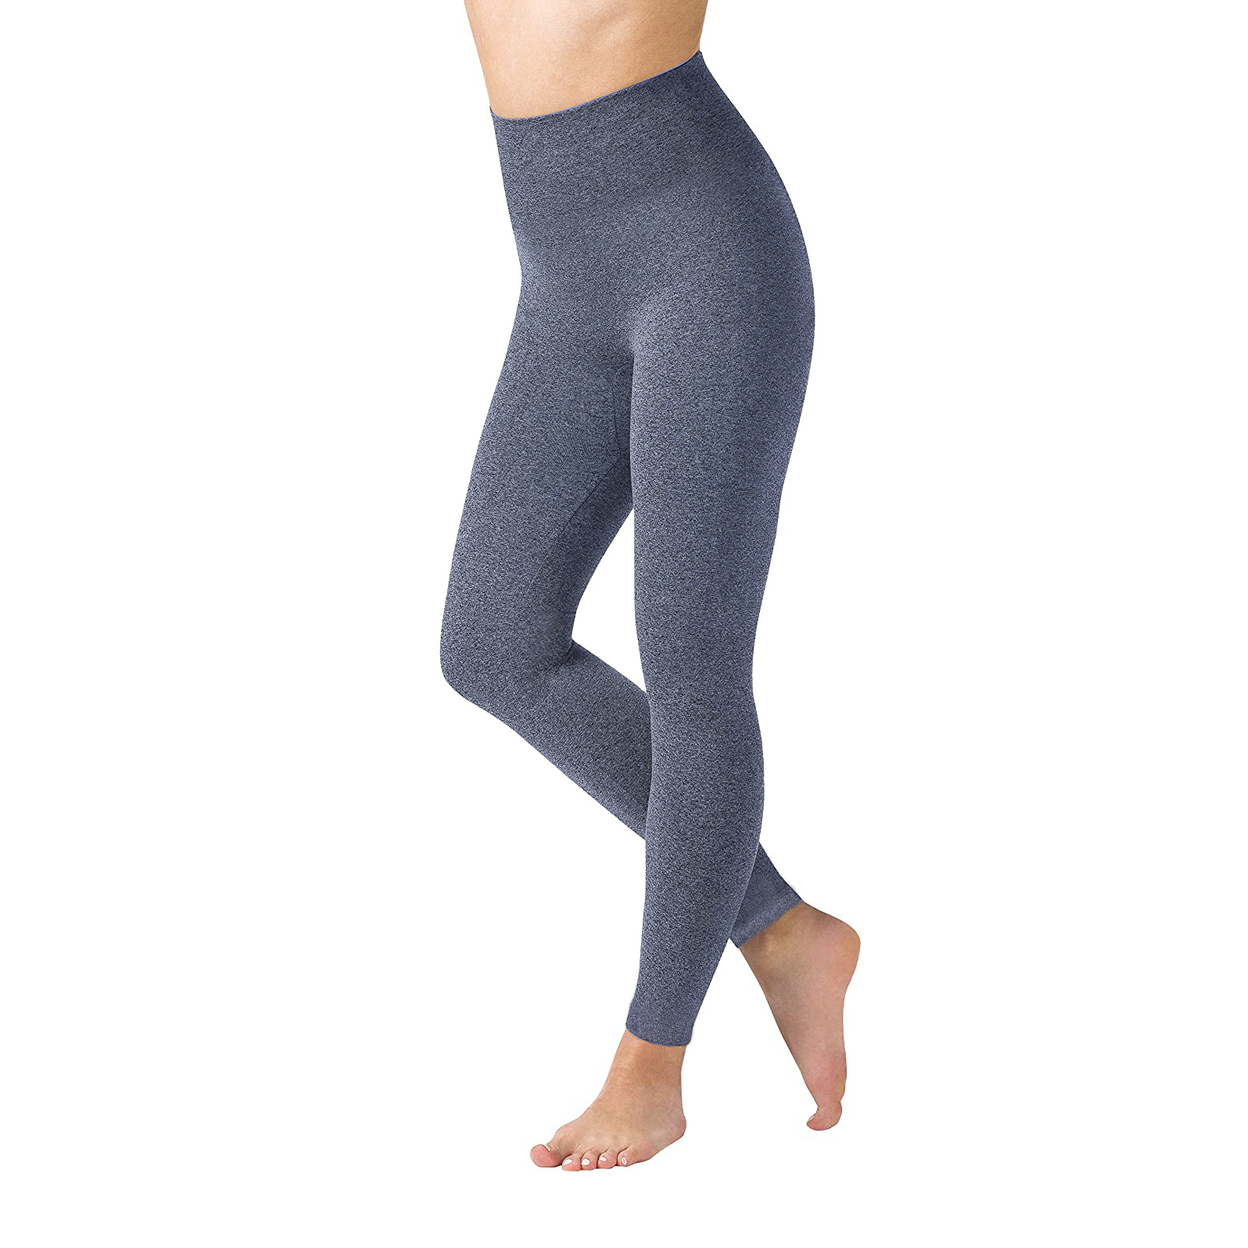 Multi-Pack: Women's High Waisted Ultra-Soft Fleece Lined Warm Marled Leggings(Available In Plus Sizes) - 2-pack, Assorted, Medium